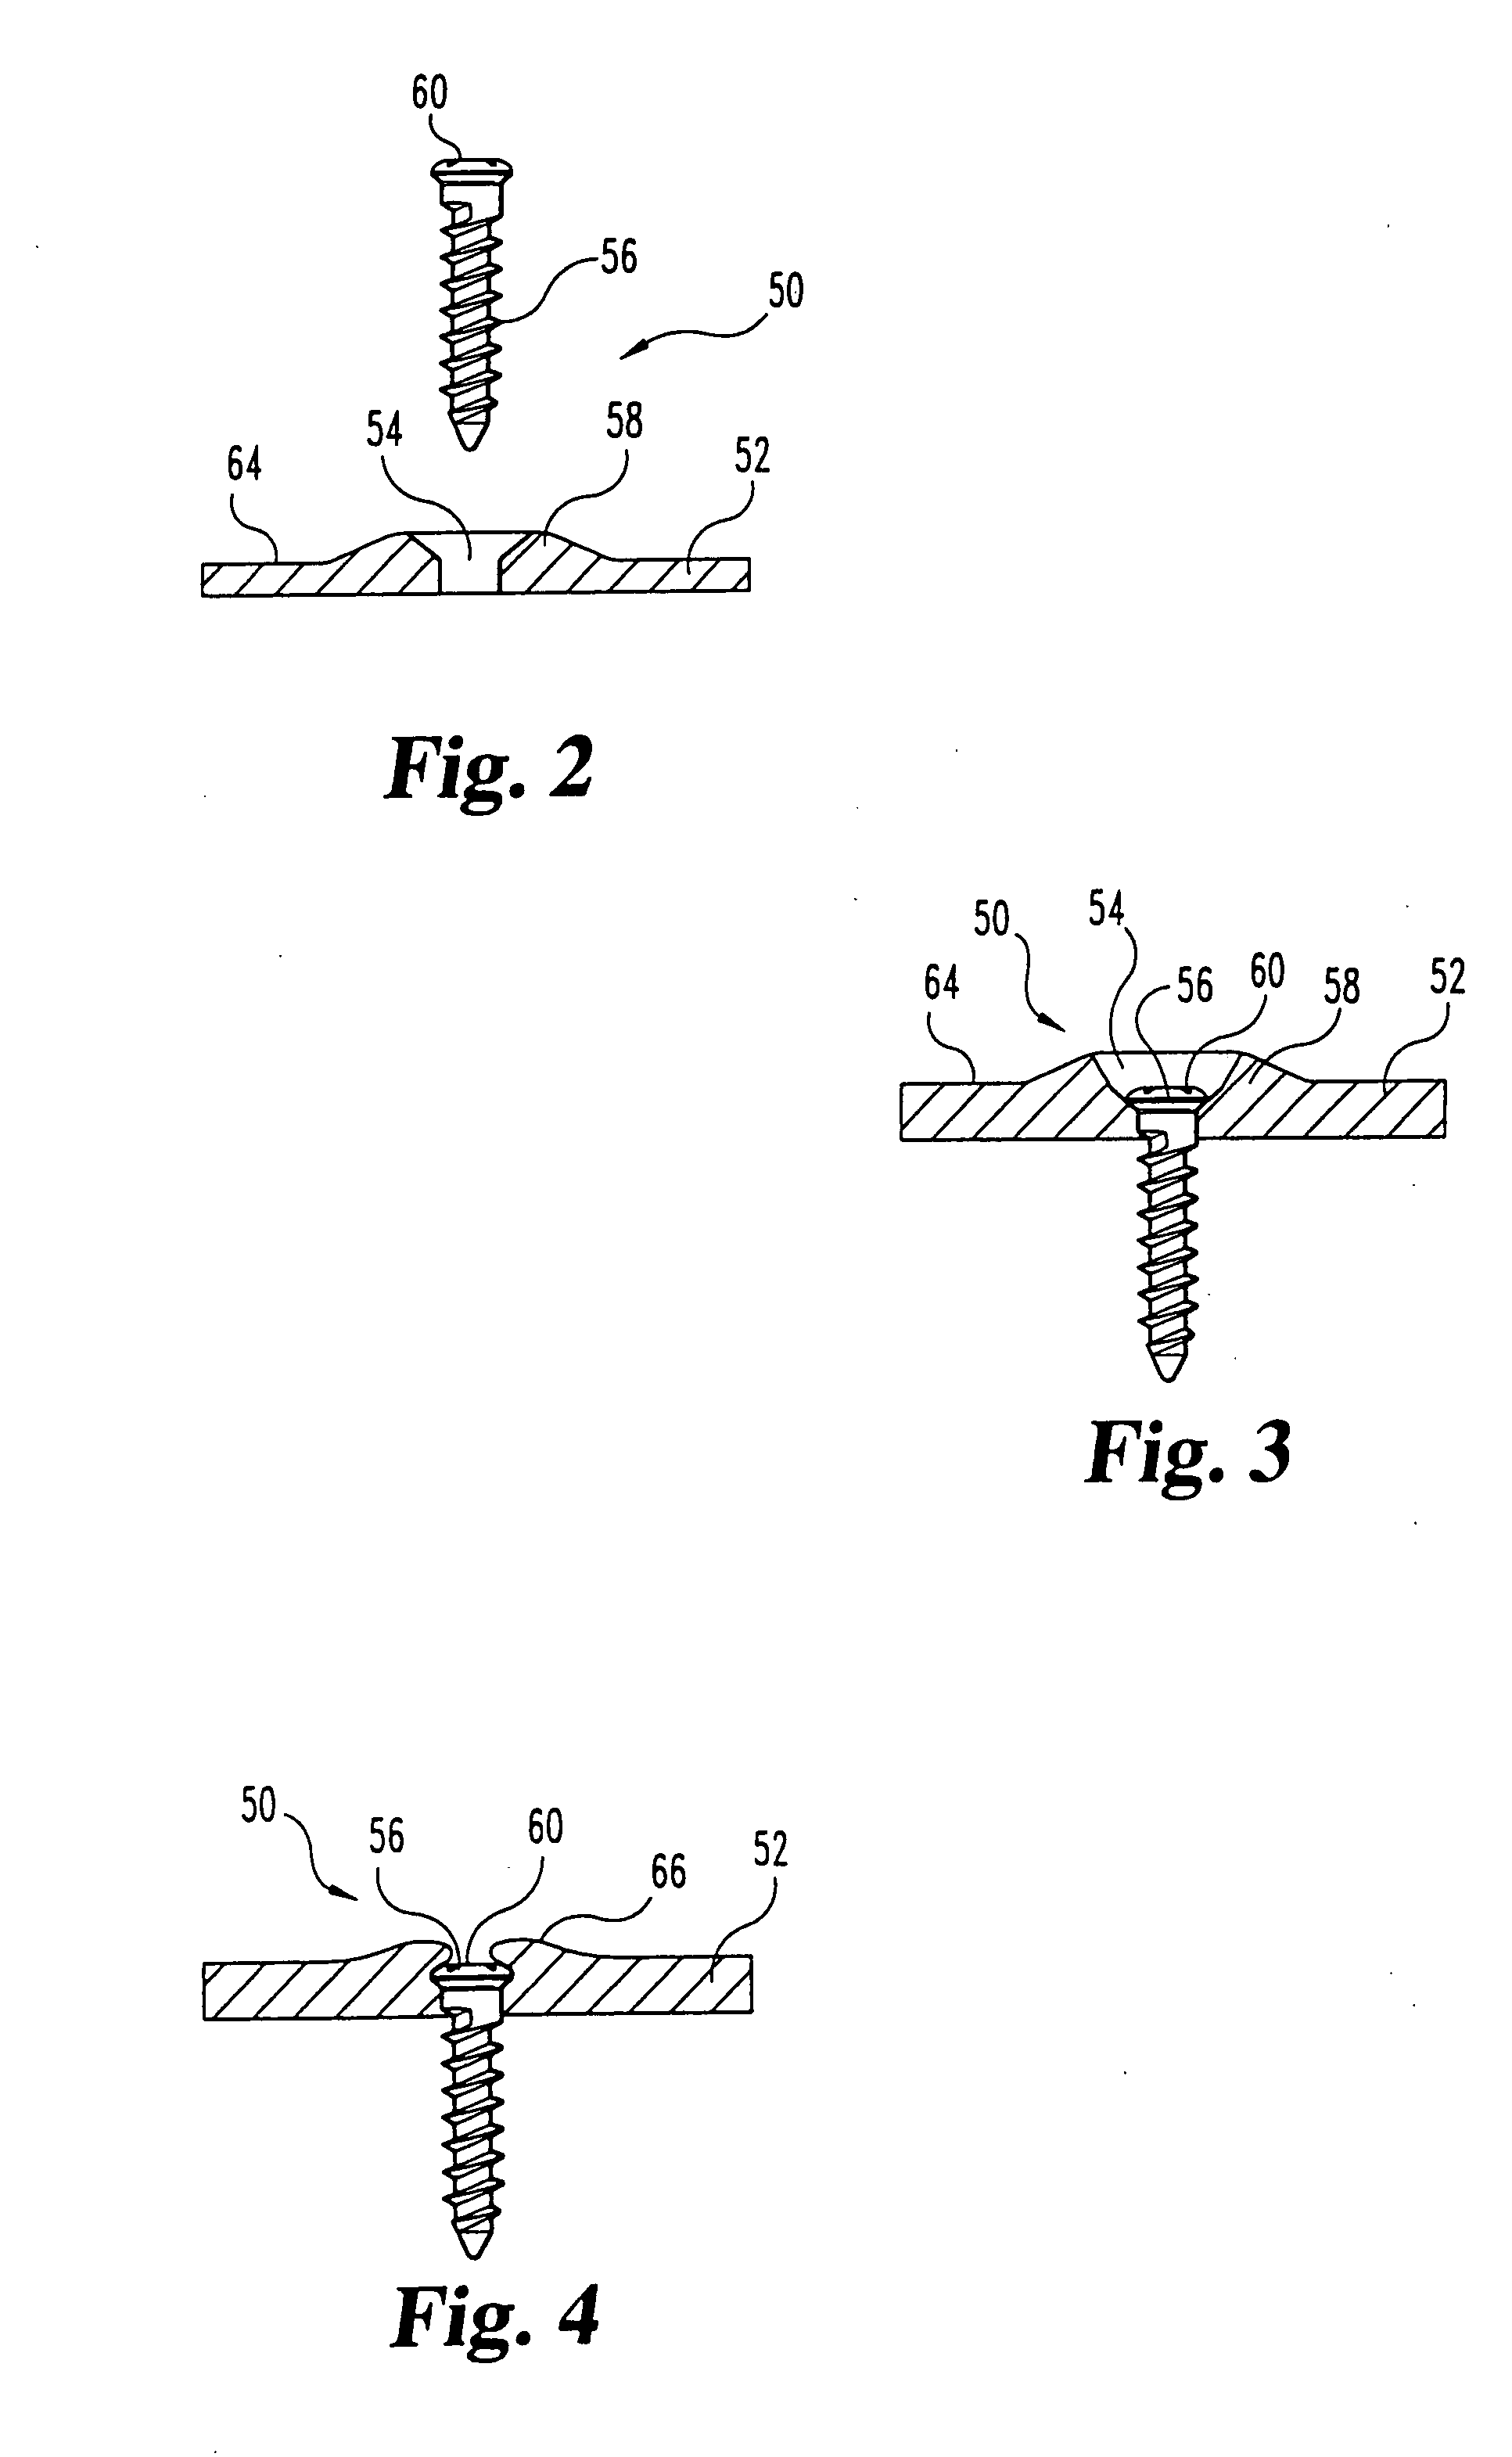 Non-metallic implant devices and intra-operative methods for assembly and fixation